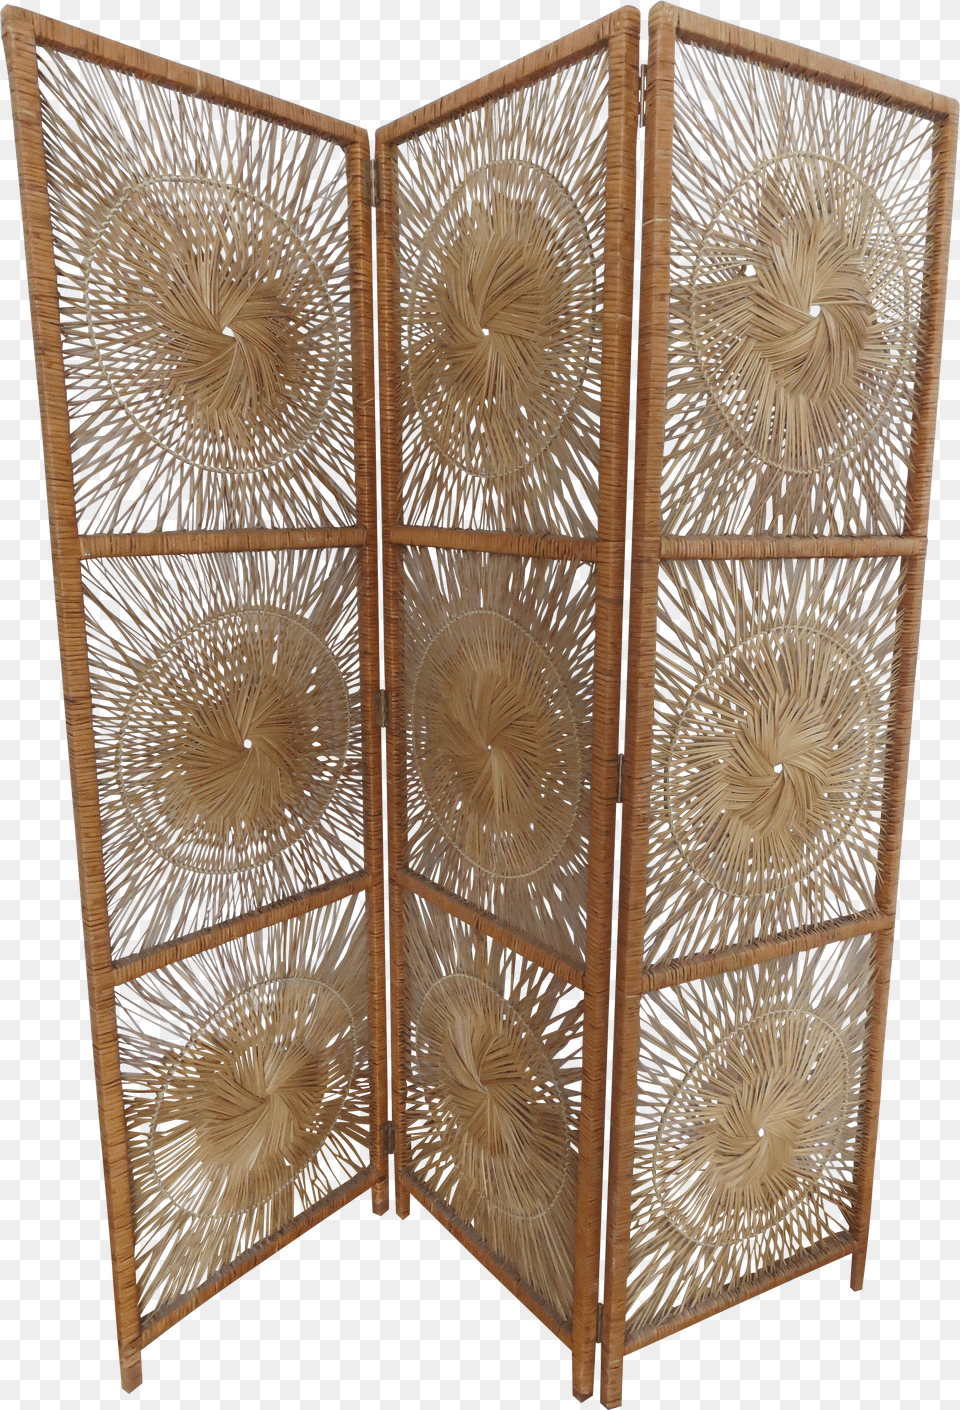 Vintage Wicker Rattan Folding Room Divider Screen Free Png